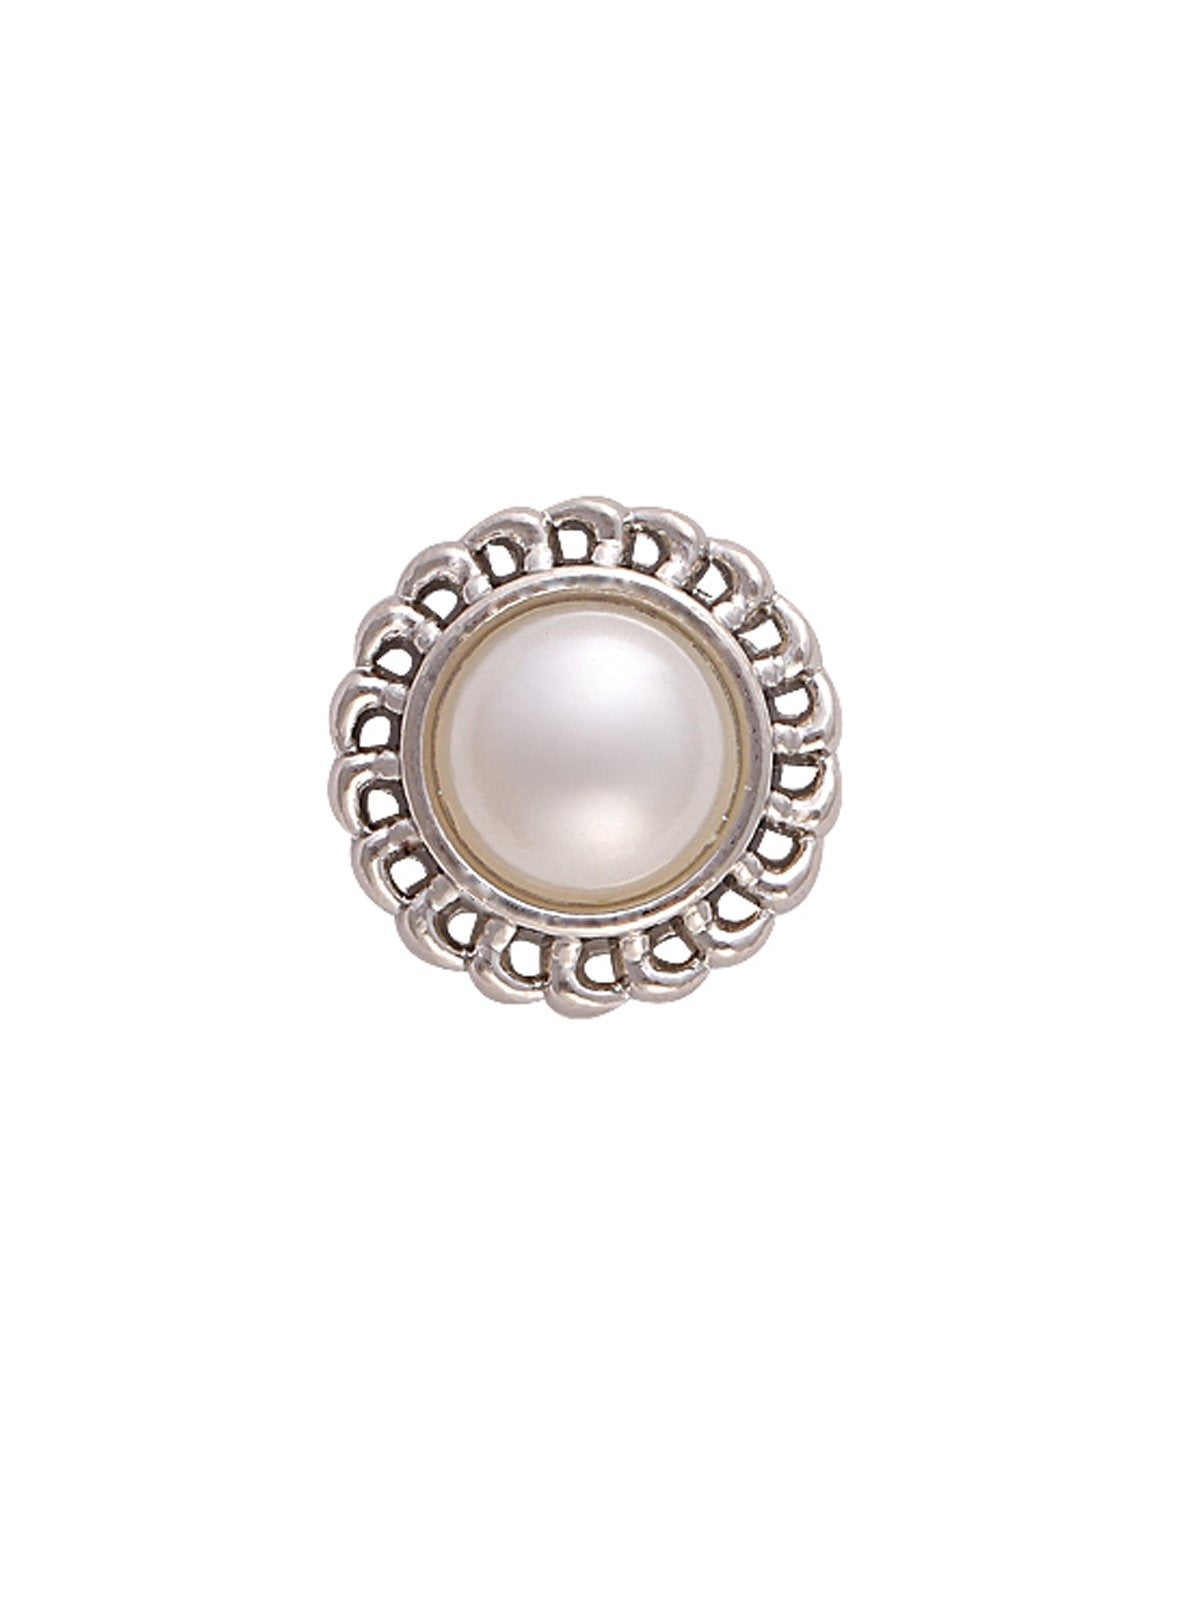 Flower Design Round Shape Shiny Silver Pearl Metal Button